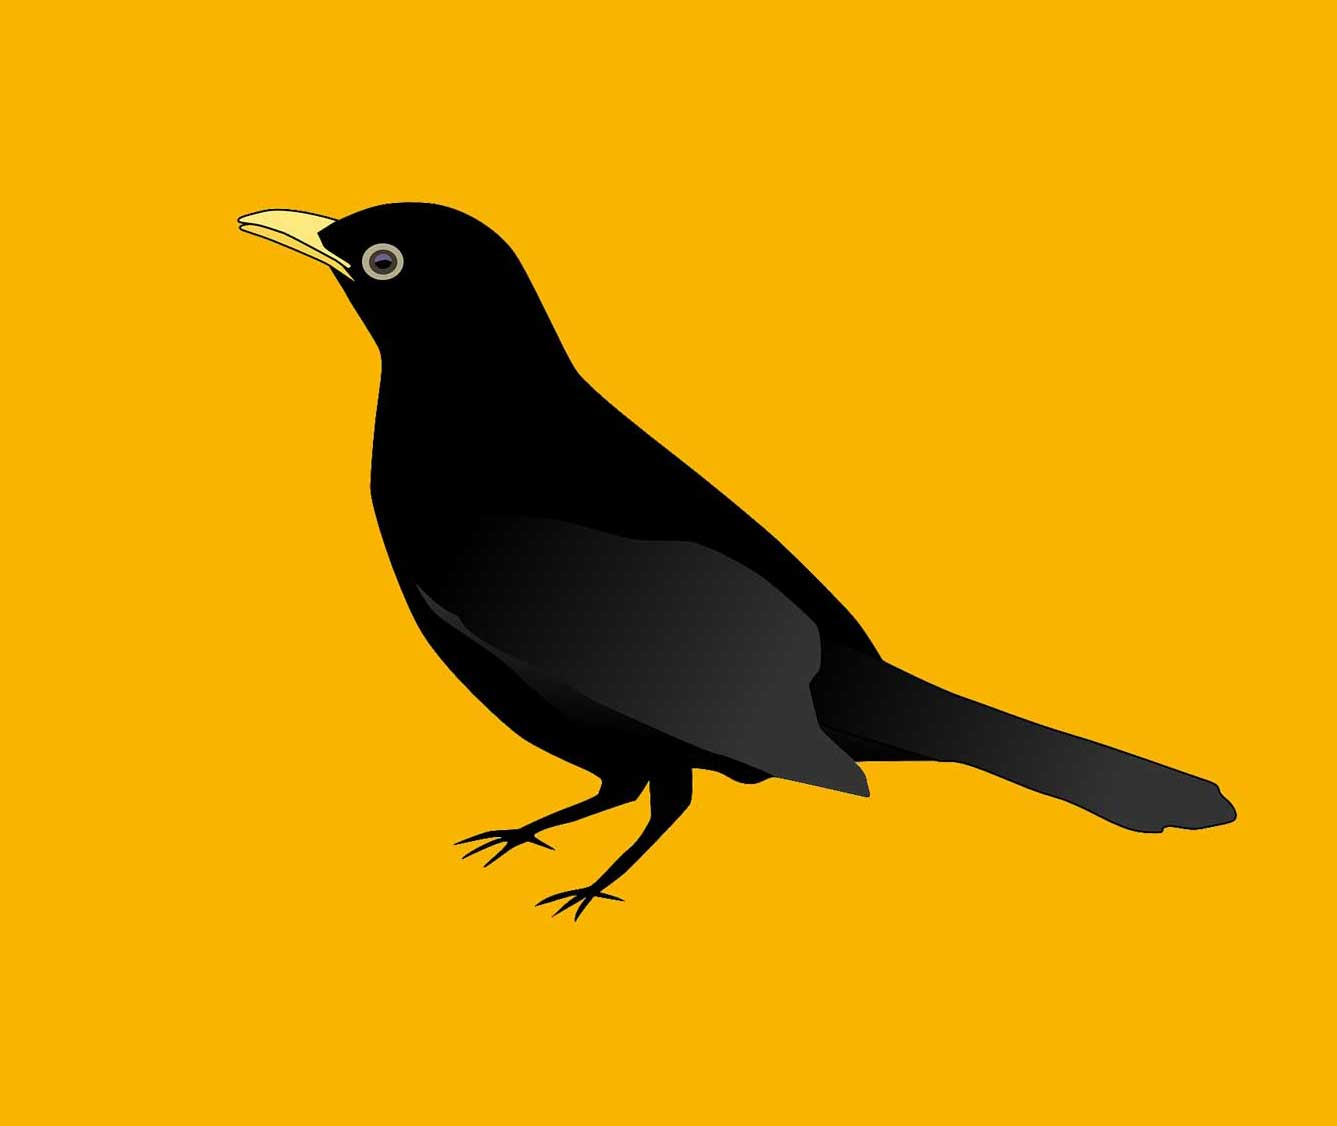 Illustration of a blackbird against a yellow background.